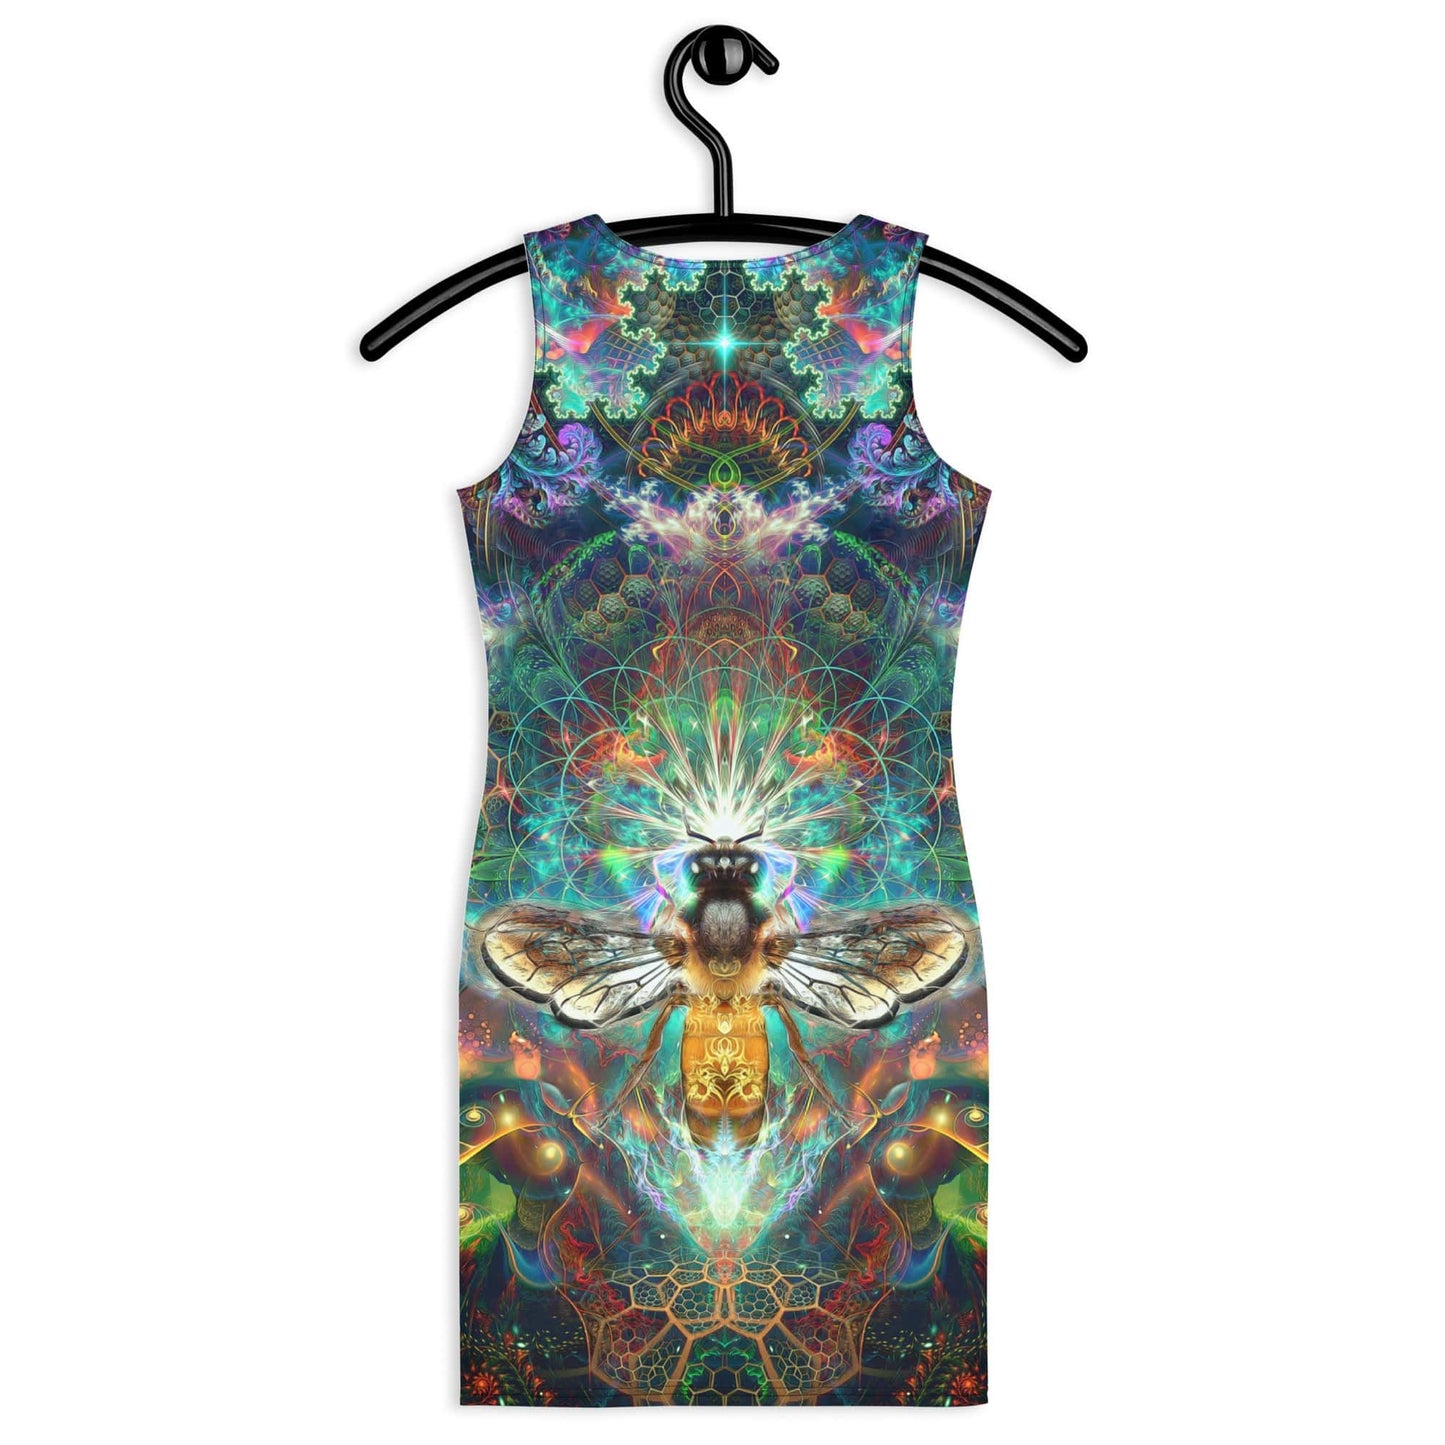 "To Bee or Not to Bee" Bodycon FITTED DRESS